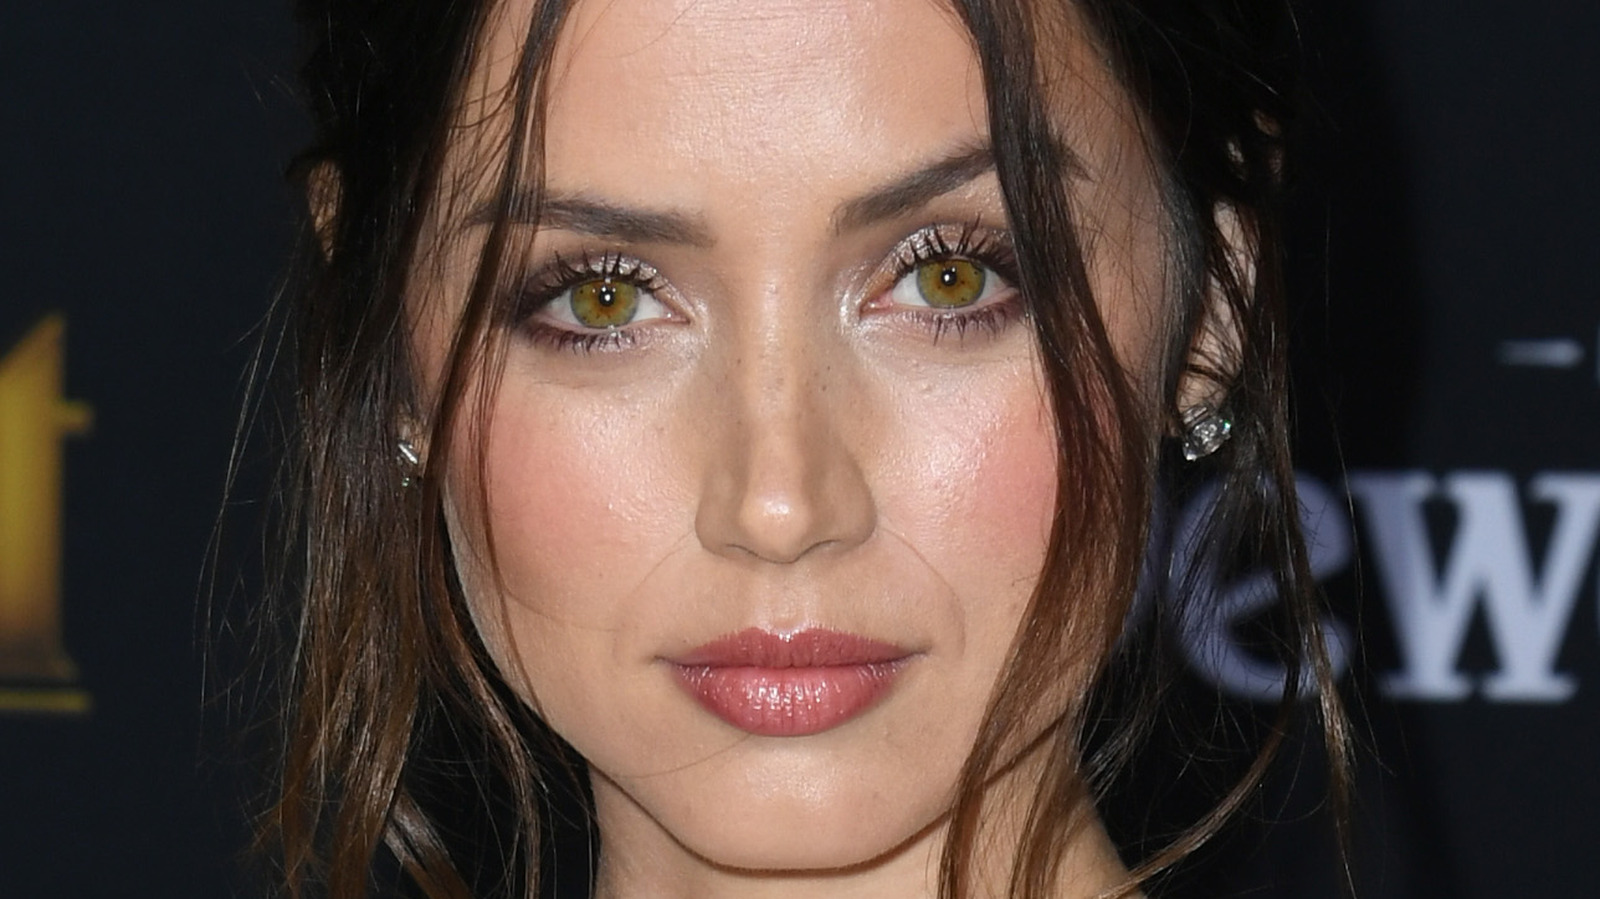 What You Don't Know About Ana De Armas - Nicki Swift